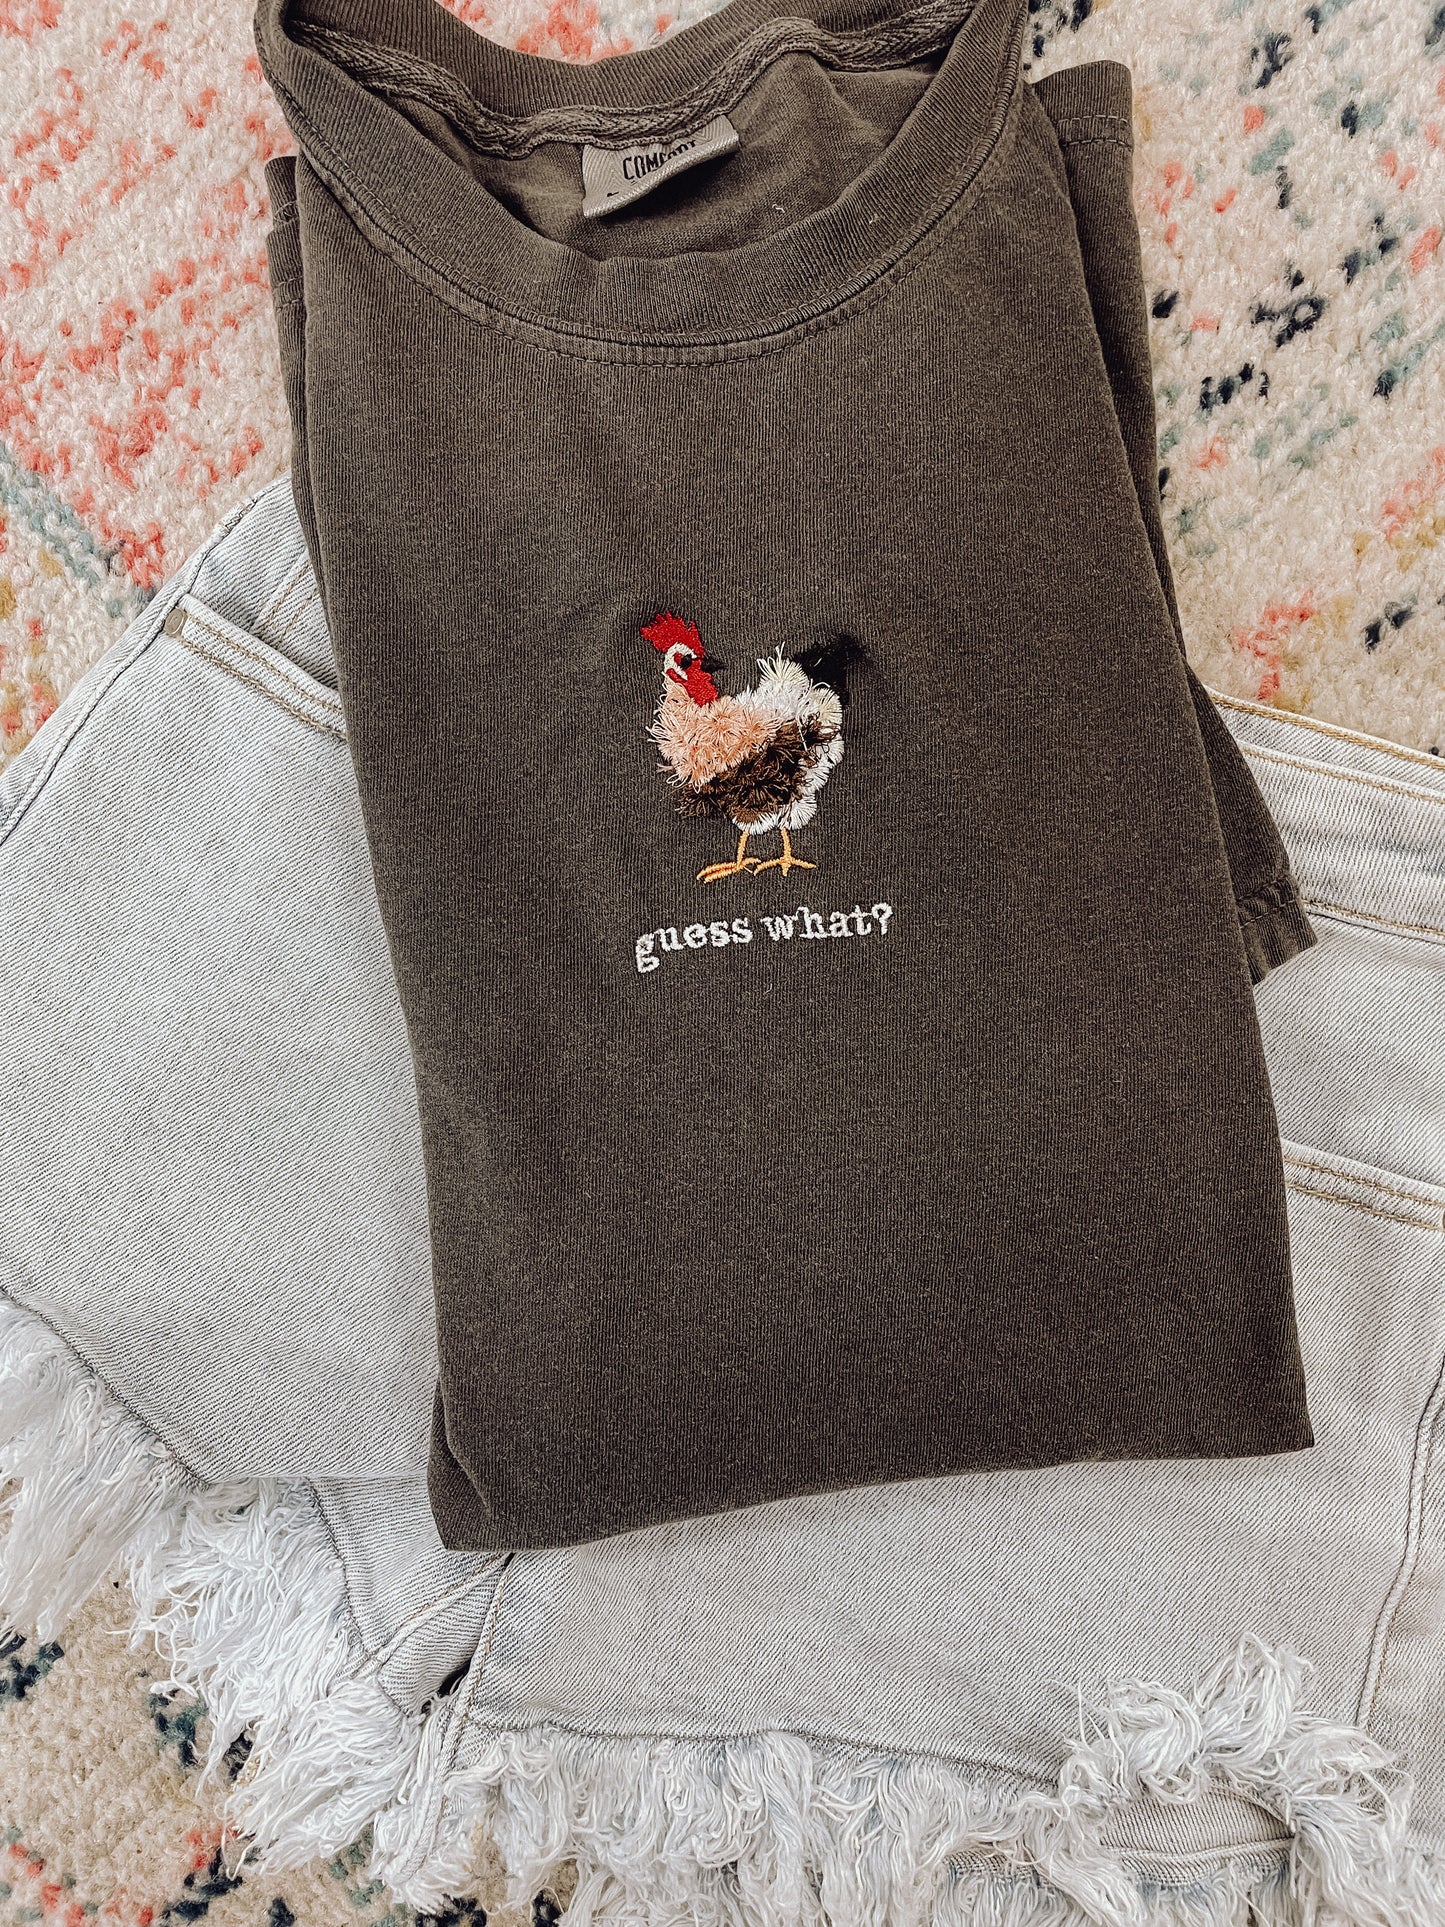 Guess What? Embroidered Tee